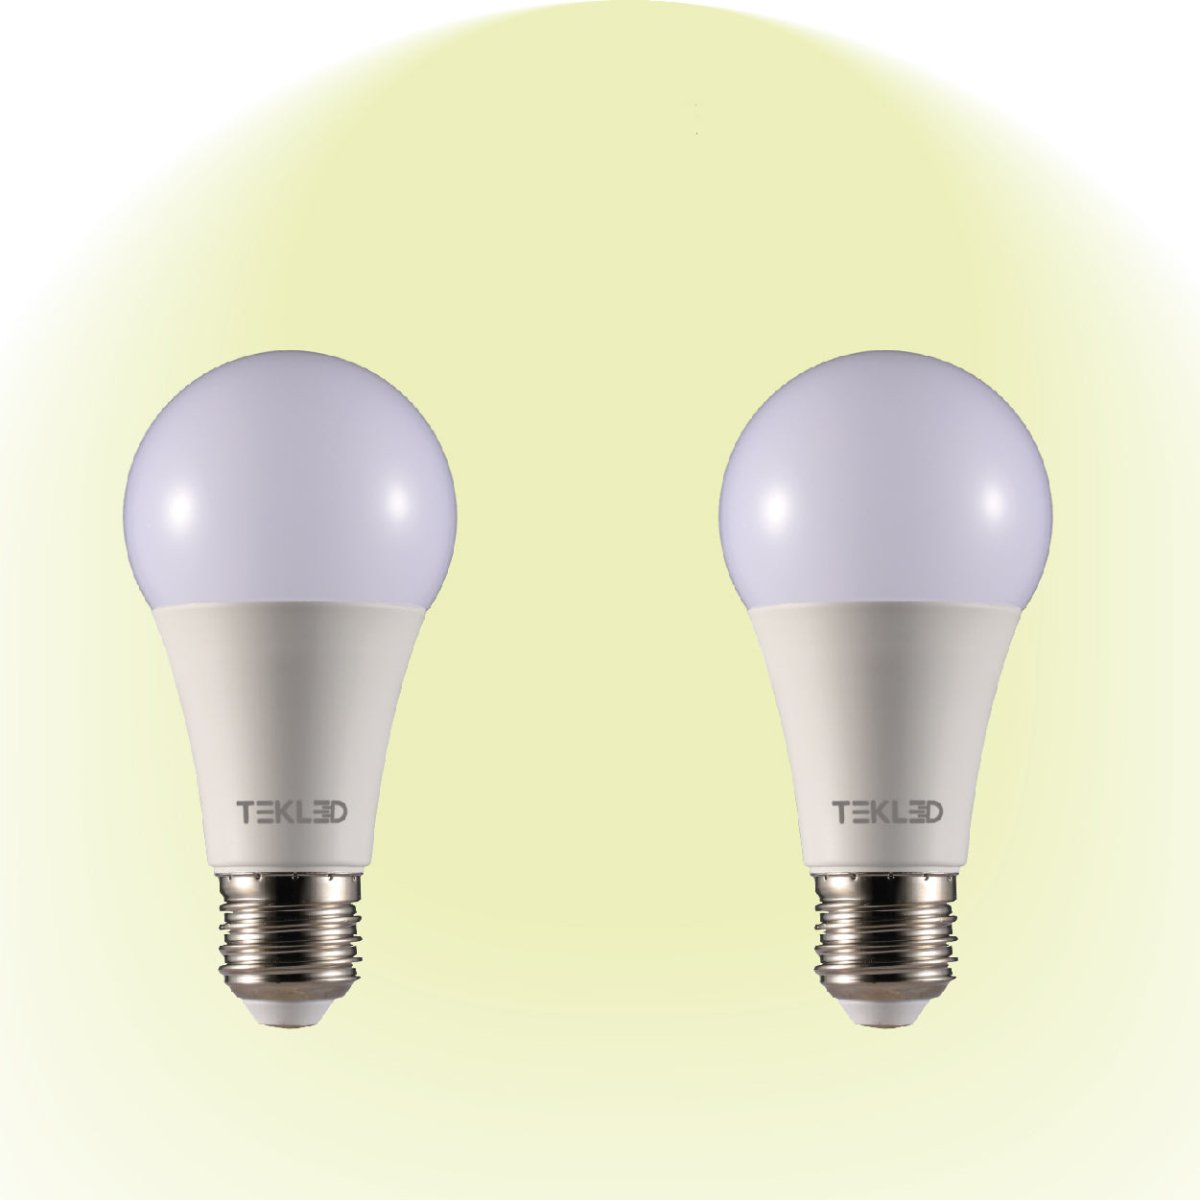 Virgo LED GLS Bulb A60 Dimmable E27 Edison Screw 4000K Cool White 9 W Pack of 2 527-15626